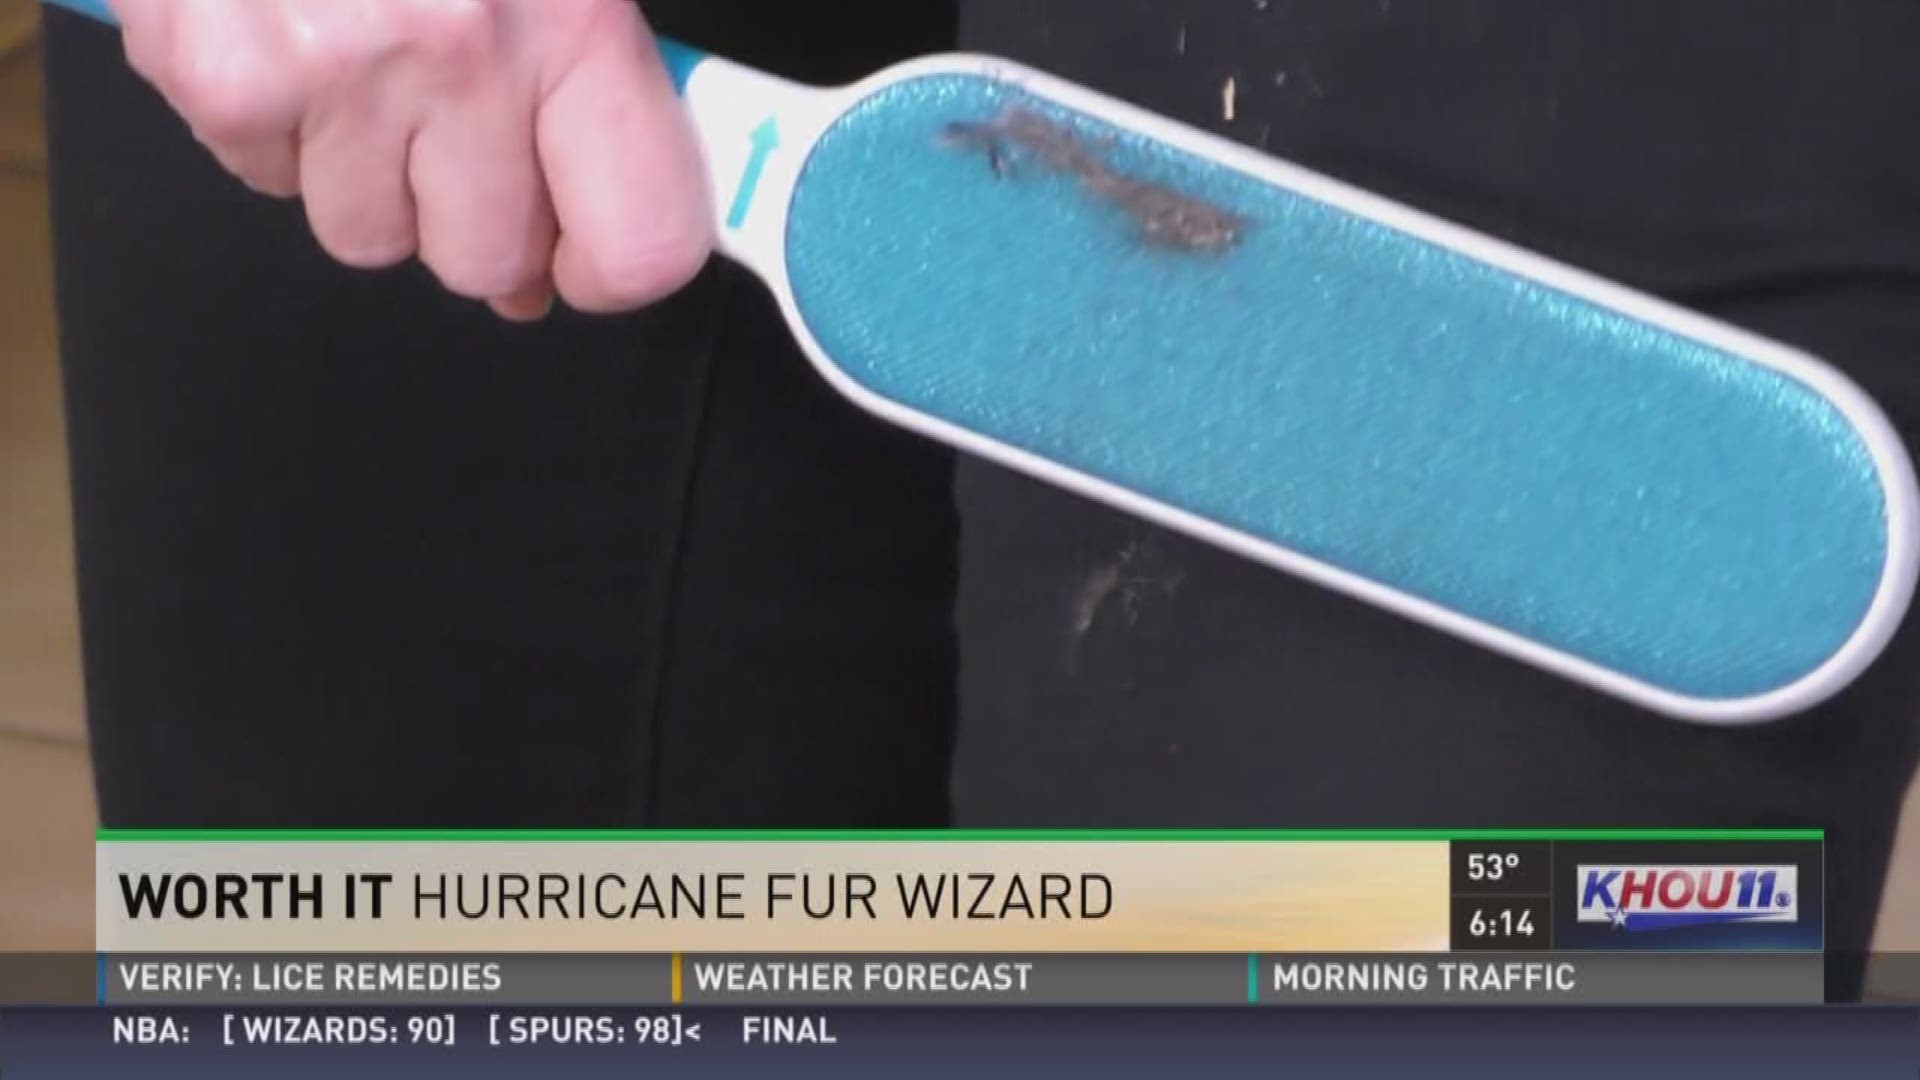 If you're a pet owner, you probably have some fur on you right now! Before you reach for the lint roller, there's a brush called the Hurricane Fur Wizard that might be a game changer.